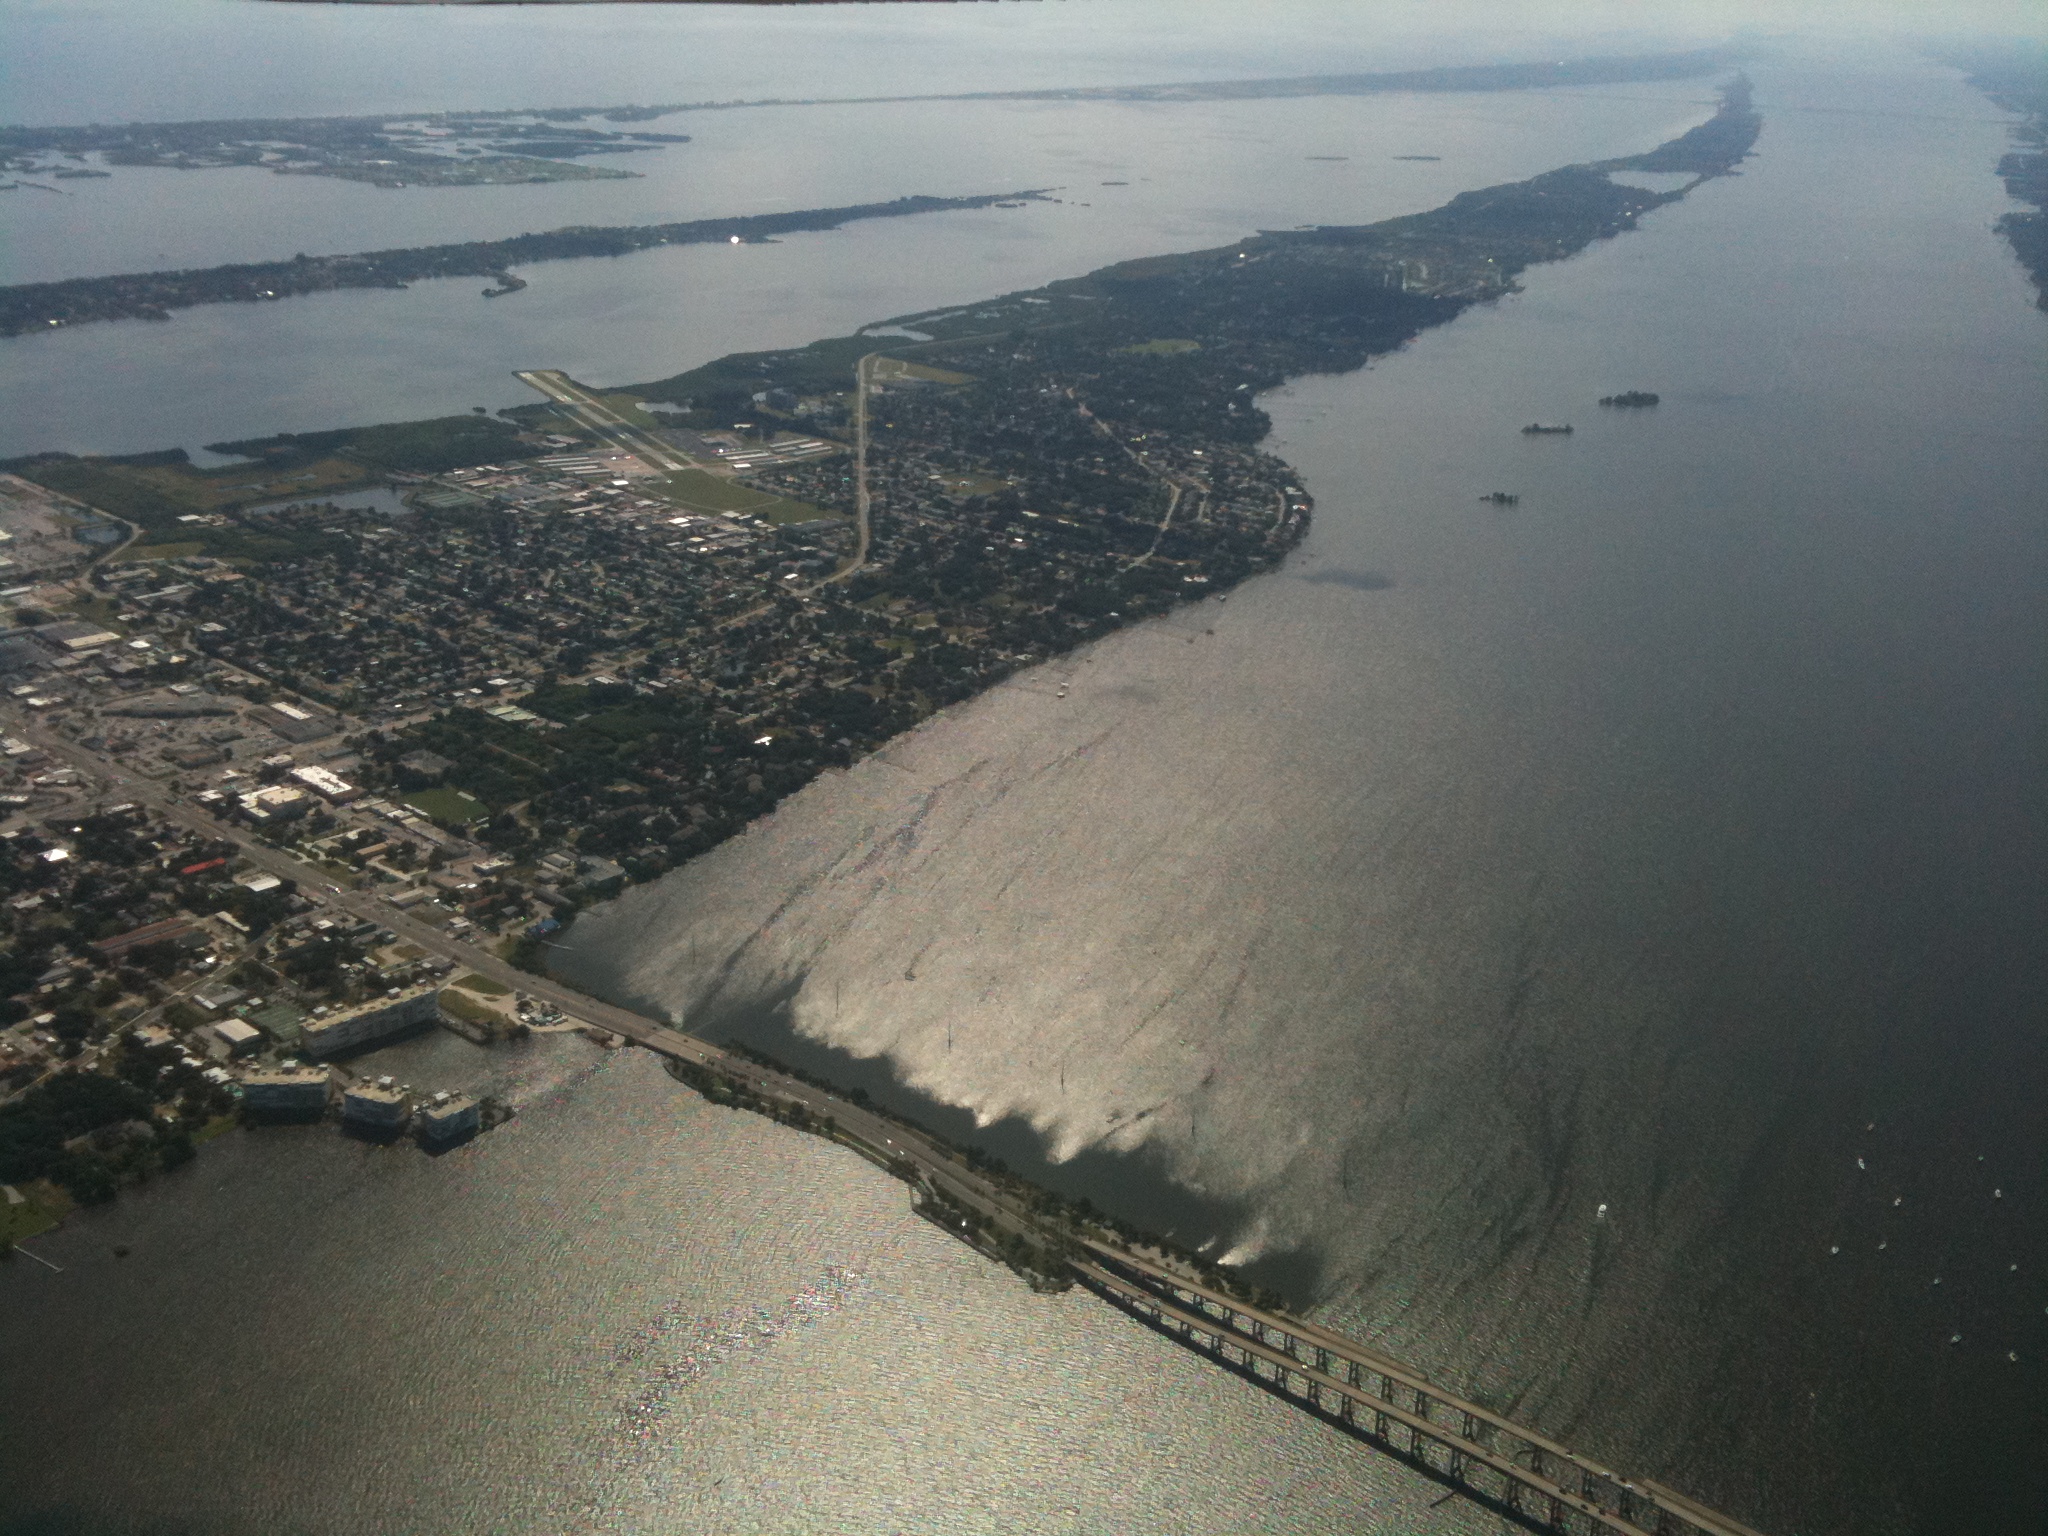 An aerial view of a body of water and a bridge.